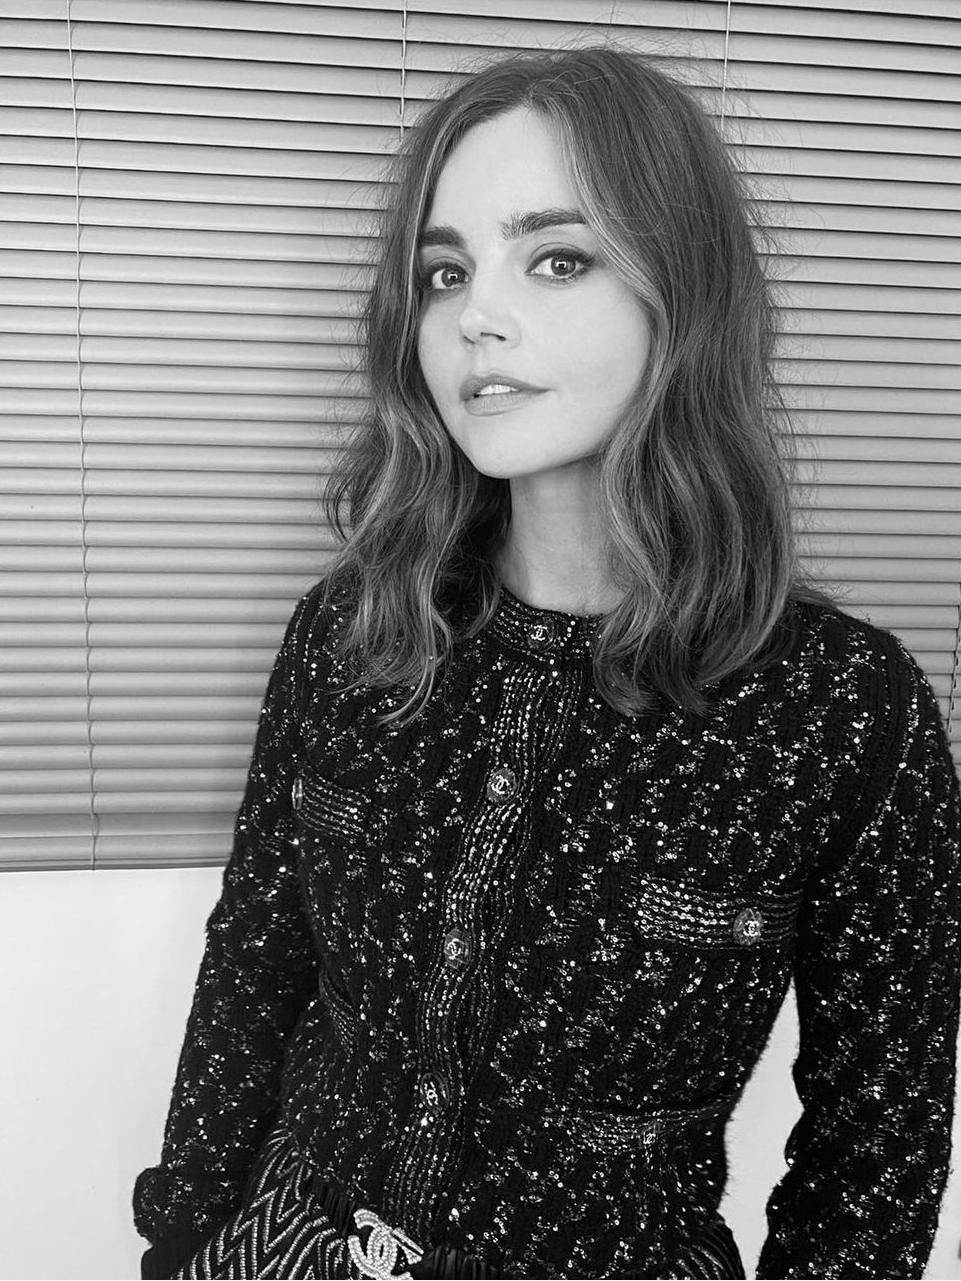 Jenna Coleman Is Cute As A Button